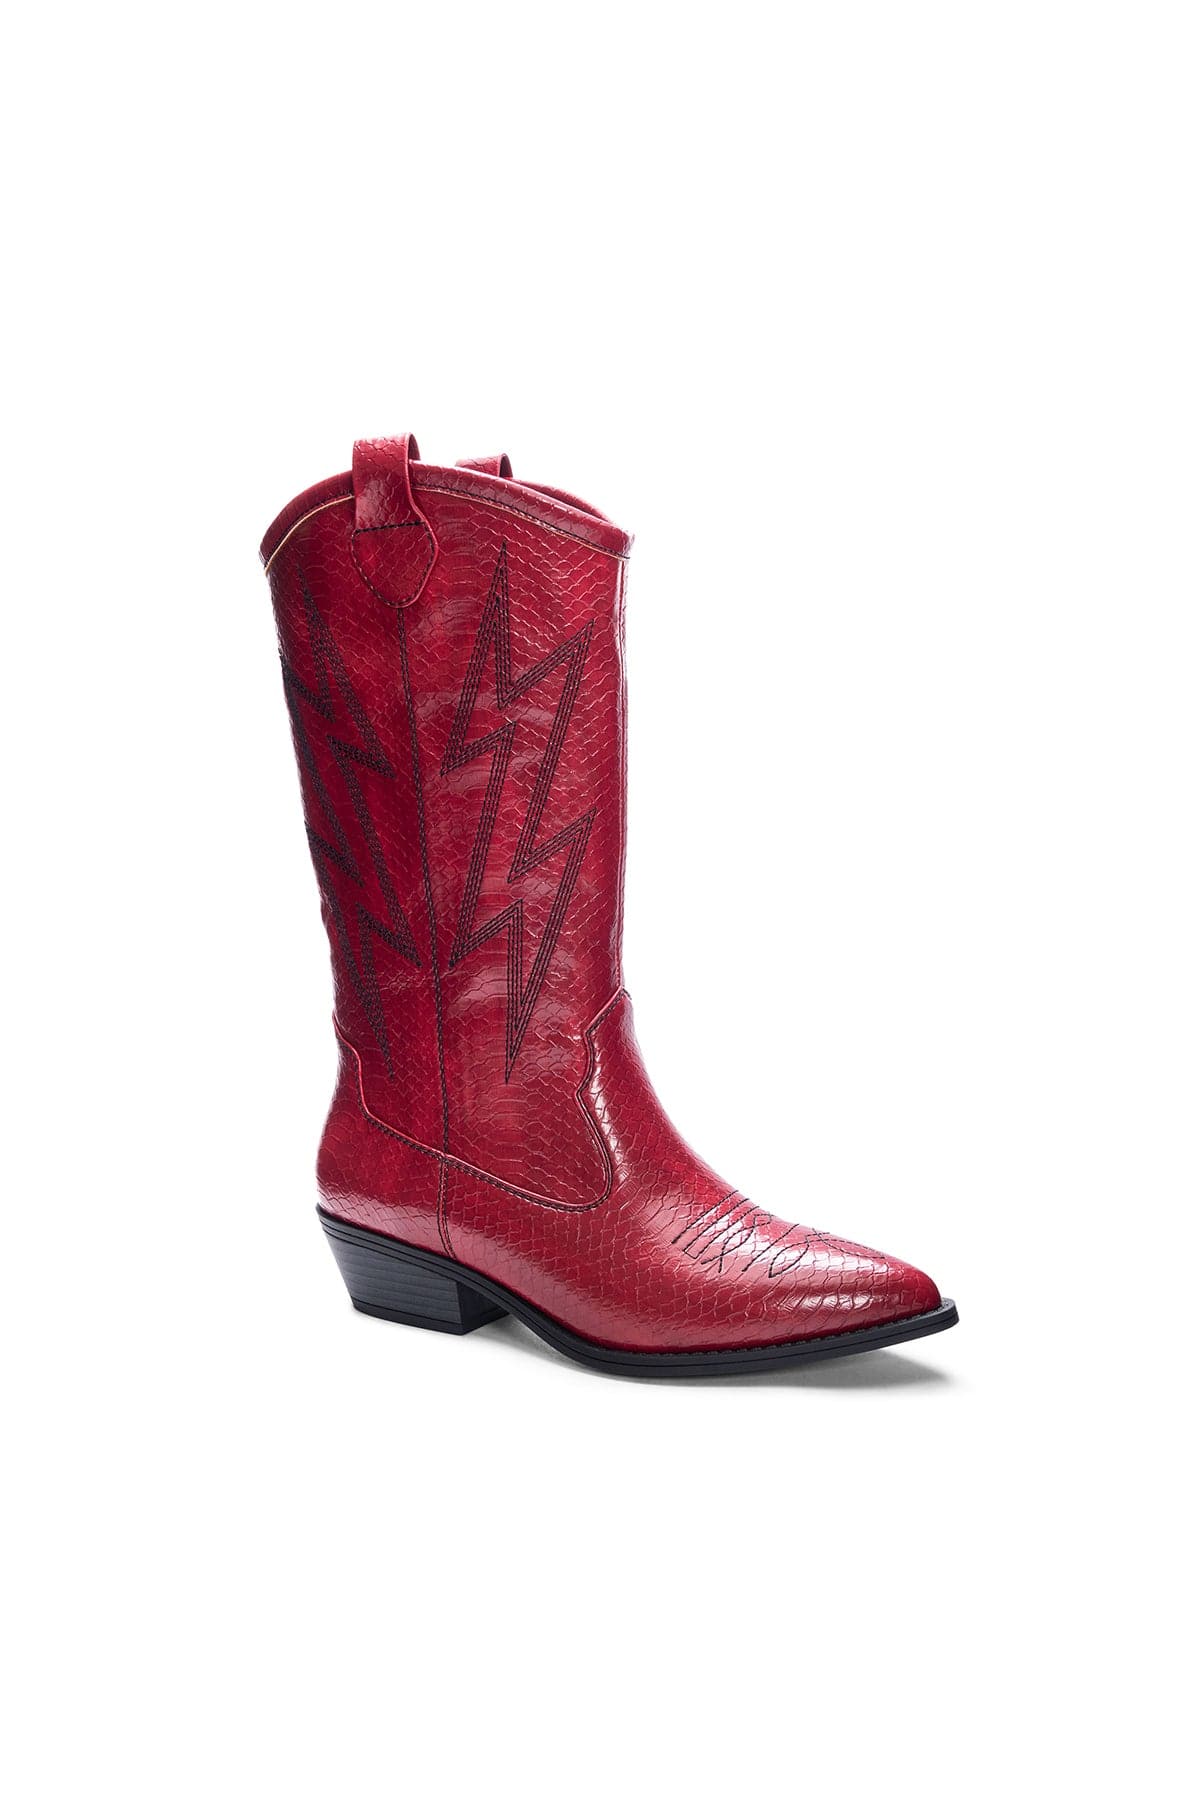 Chinese Laundry Josea Red Western Boot